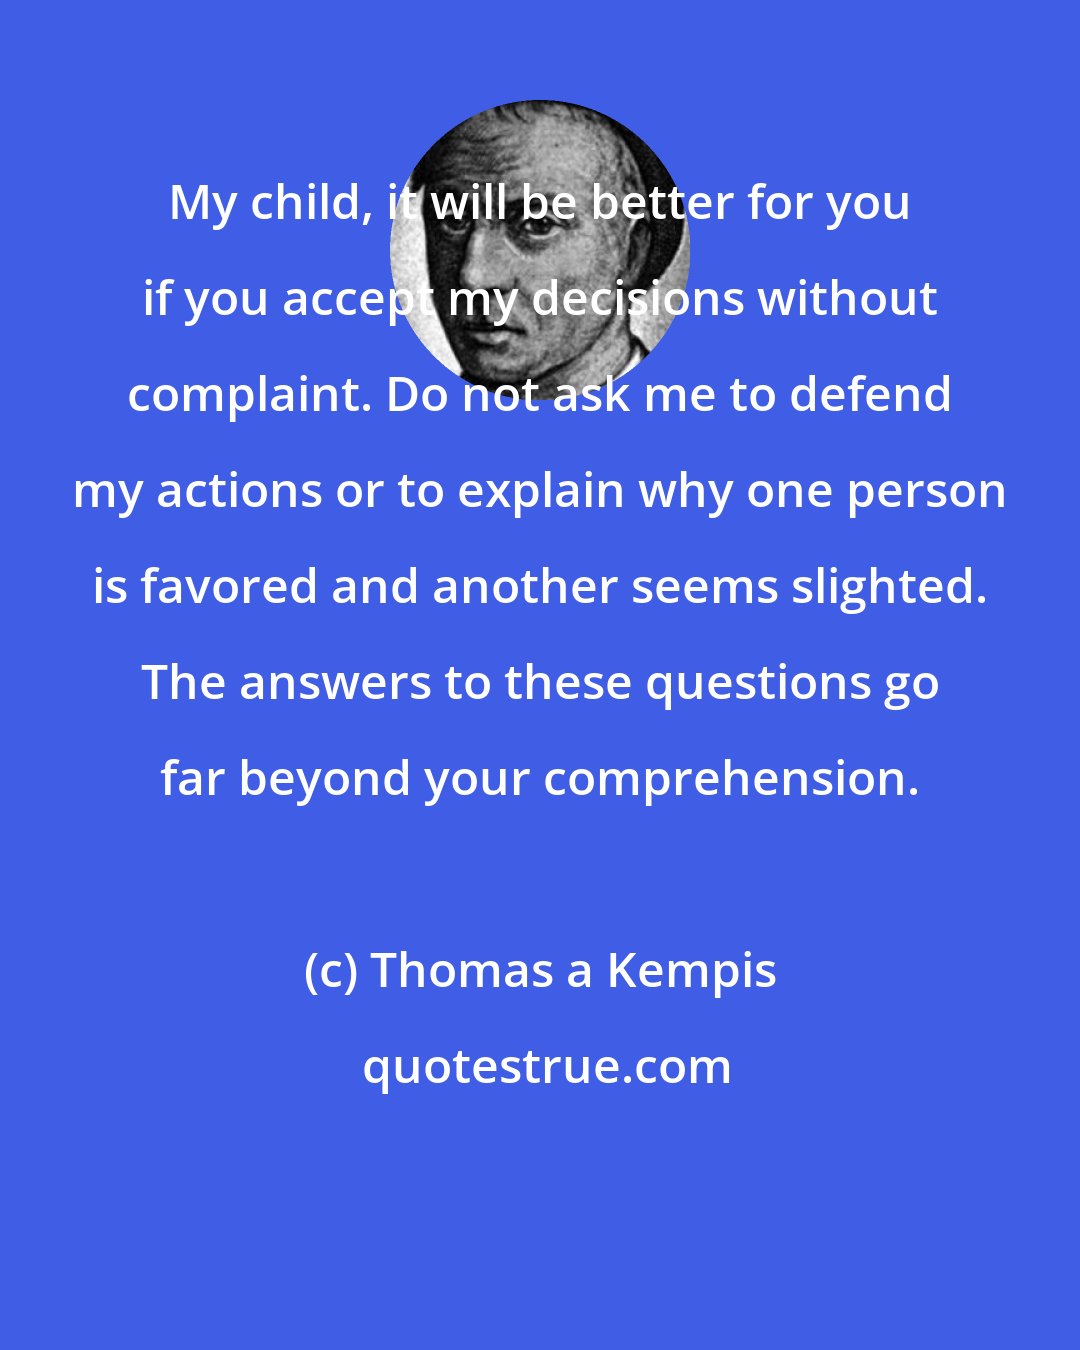 Thomas a Kempis: My child, it will be better for you if you accept my decisions without complaint. Do not ask me to defend my actions or to explain why one person is favored and another seems slighted. The answers to these questions go far beyond your comprehension.